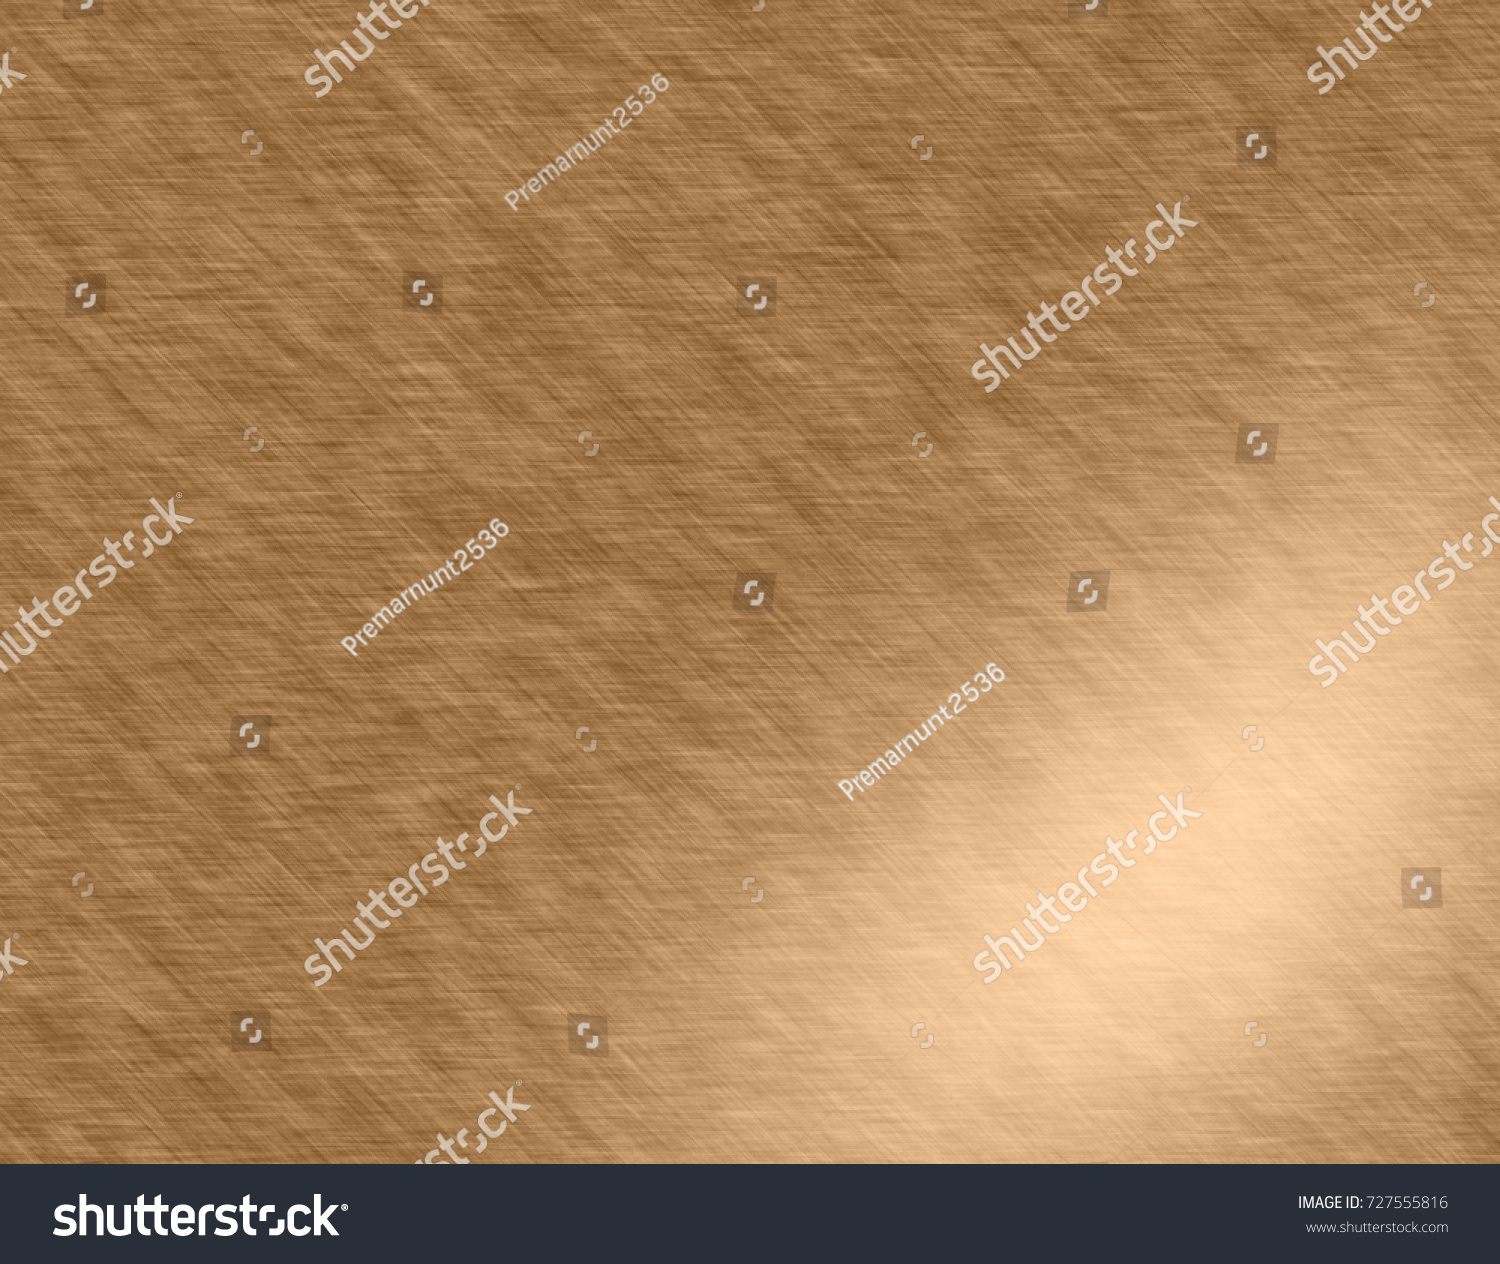 Gold metal brushed background or texture #727555816